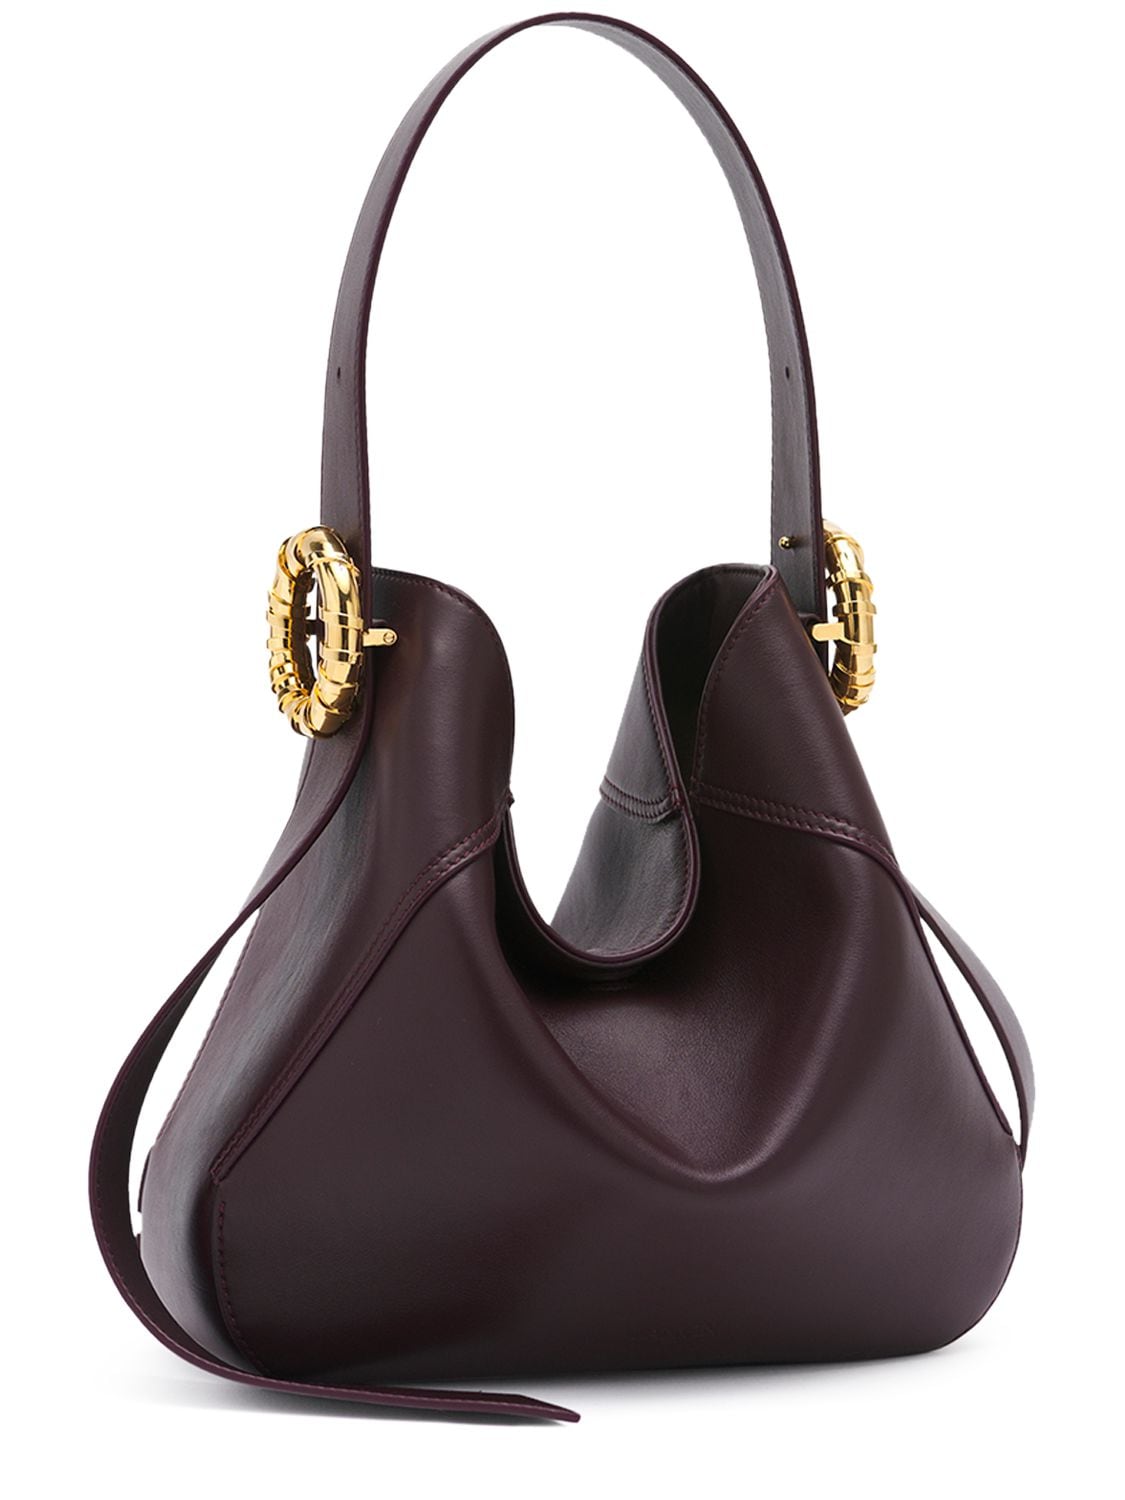 LANVIN MELODIE LEATHER HOBO BAG